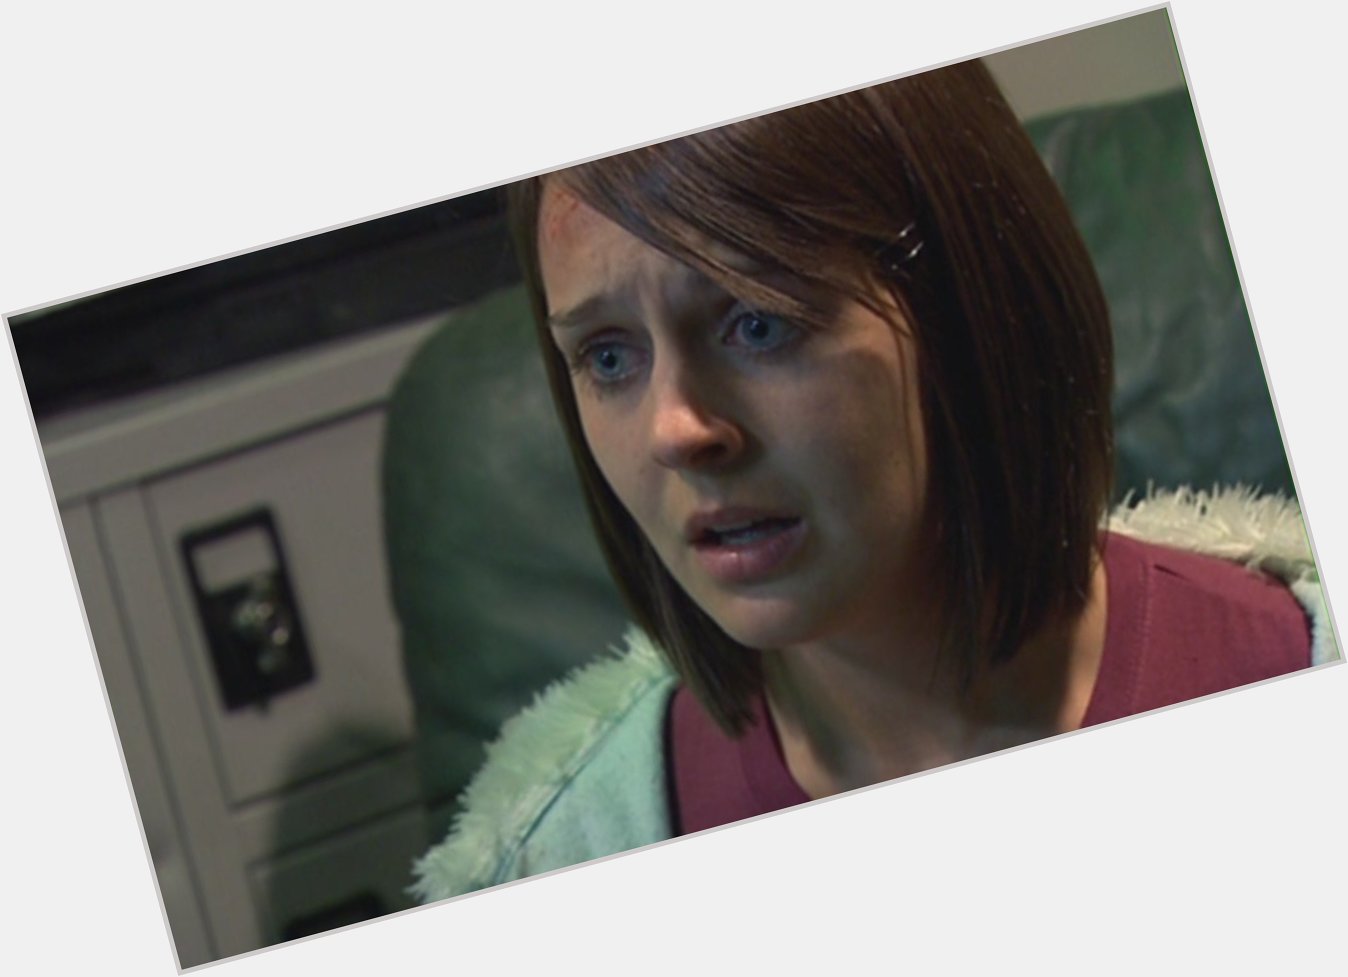 Happy Birthday to Clare Thomas who played Lucy Skinner in The Sarah Jane Adventures - The Last Sontaran. 